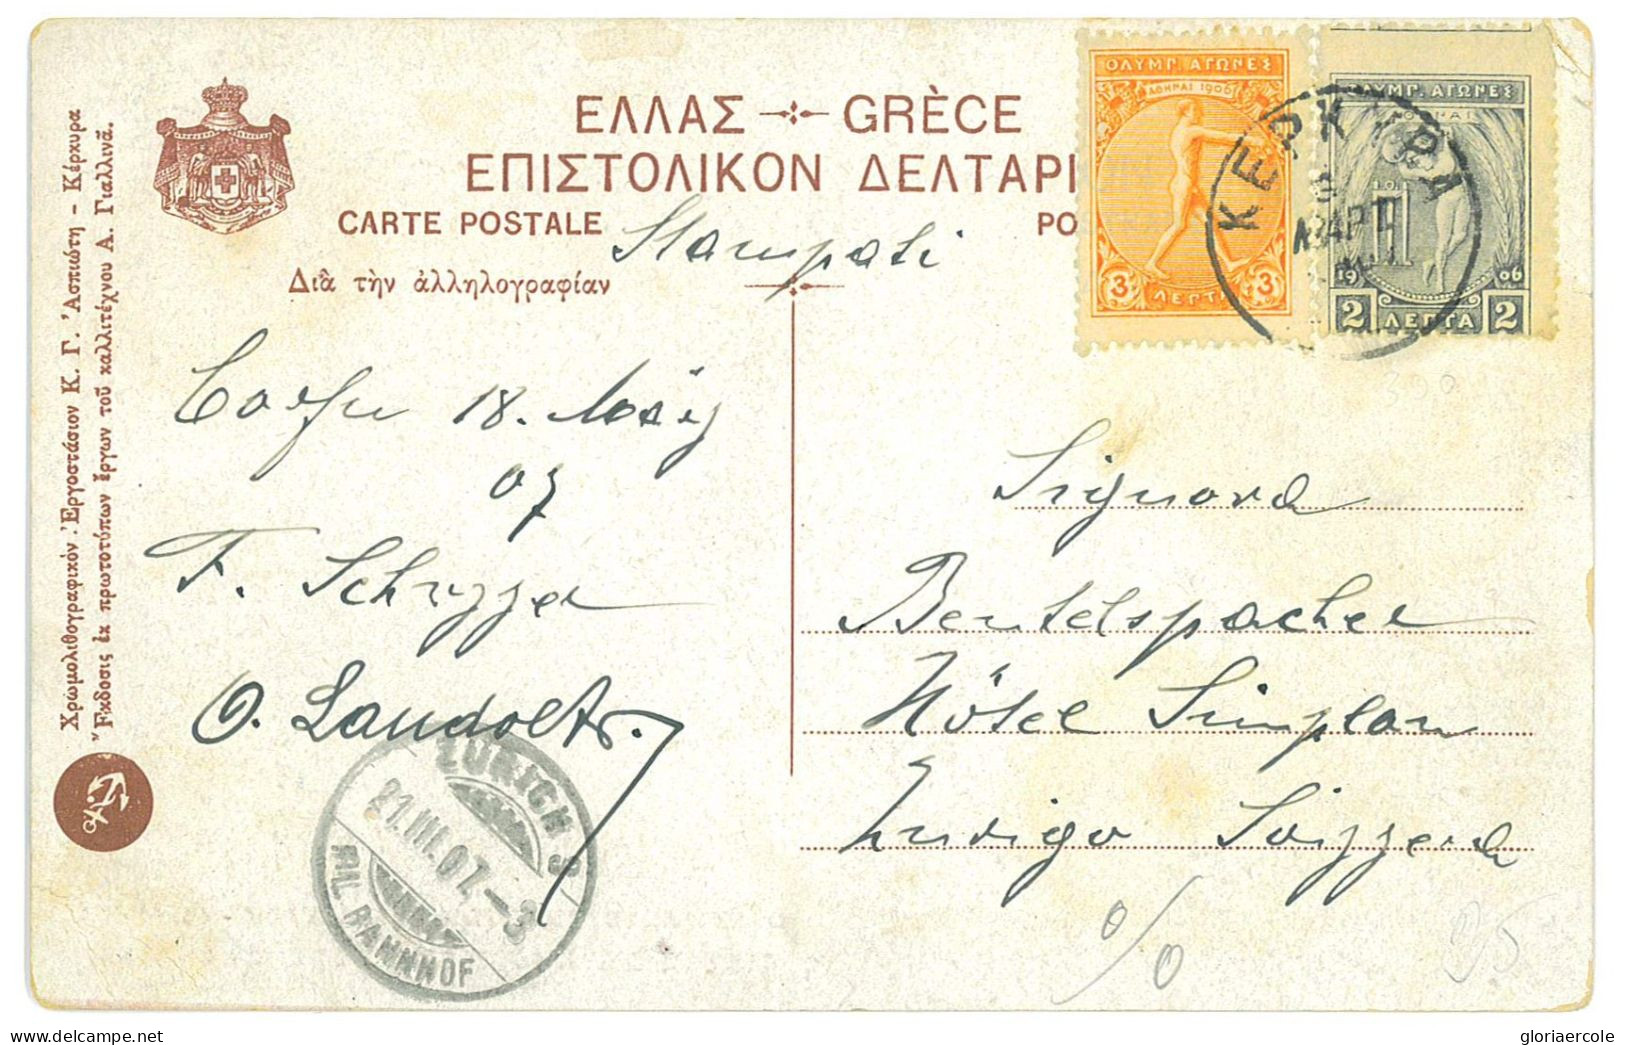 P2765 - OLYMPIC GAMES GREECE 1905 ISSUE, 5 LEPTA RATE TO ZURICH, - Covers & Documents